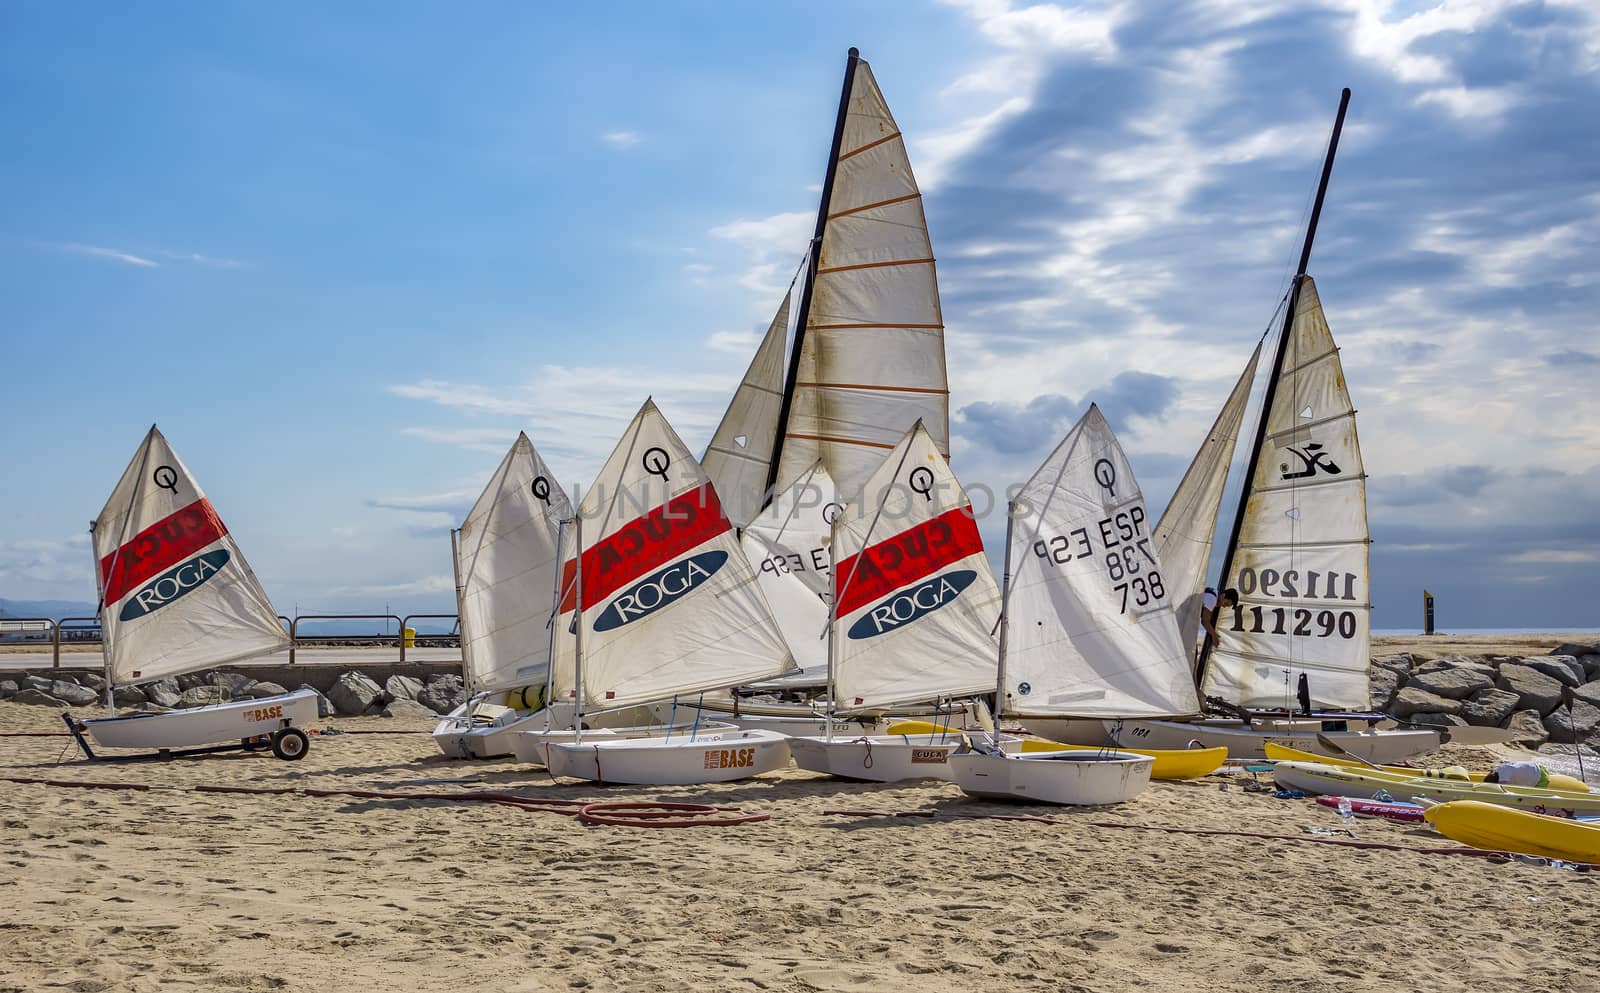 BARCELONA, SPAIN - JULY 13, 2016: People prepare yachts for surfing. Municipal Nautical Barcelona - surfing club for children and adult. Located in Park Poblenou, Barcelona, Spain.

Barcelona, Spain - July 13, 2016: People prepare yachts for surfing. Municipal Nautical Barcelona - surfing club for children and adult. Located in Park Poblenou, Barcelona, Spain.